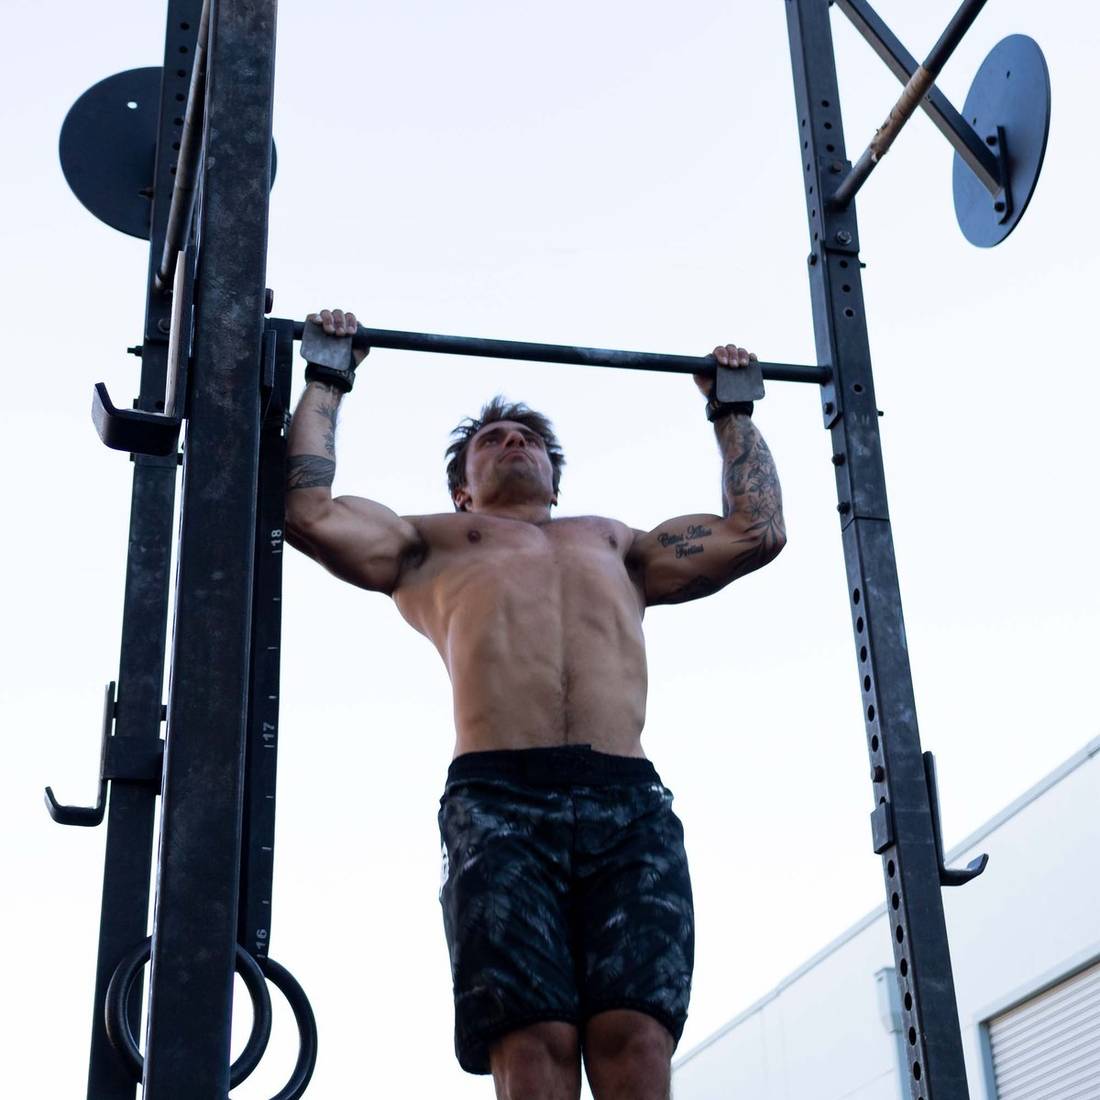 Rig - 5 Squat Cells with Punching Bag Hangers